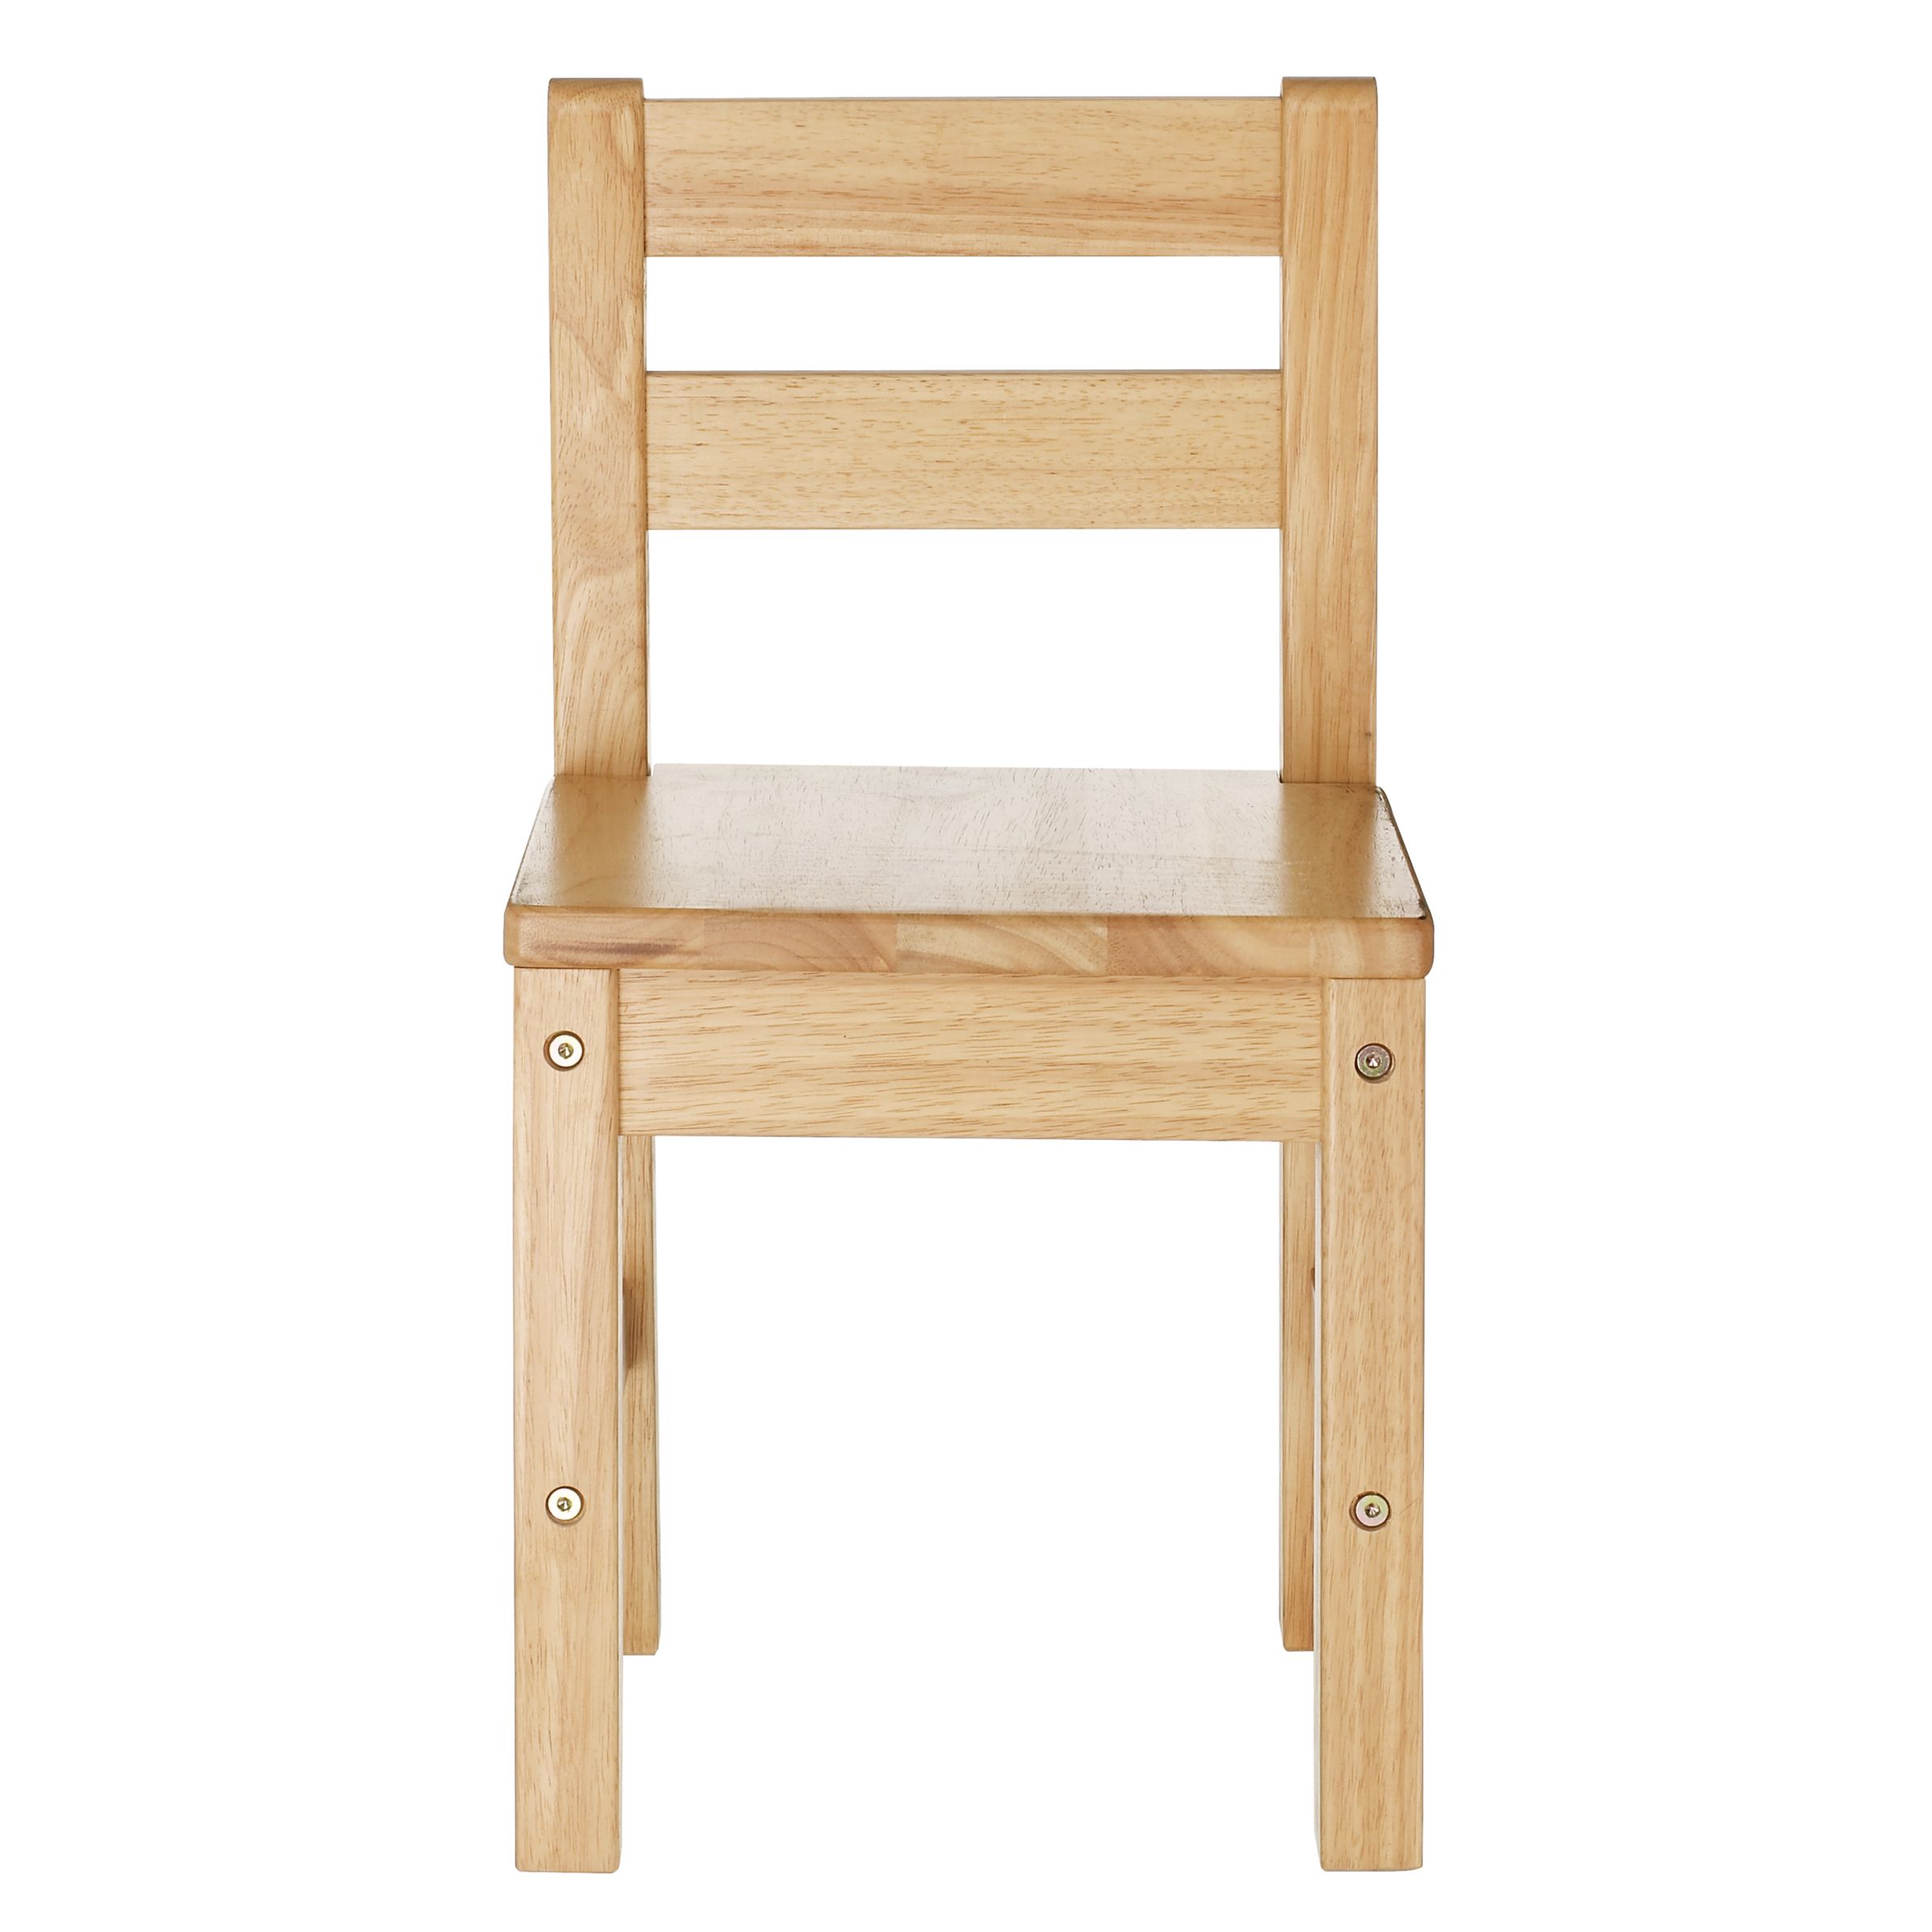 Classic Childrens Chair, Natural